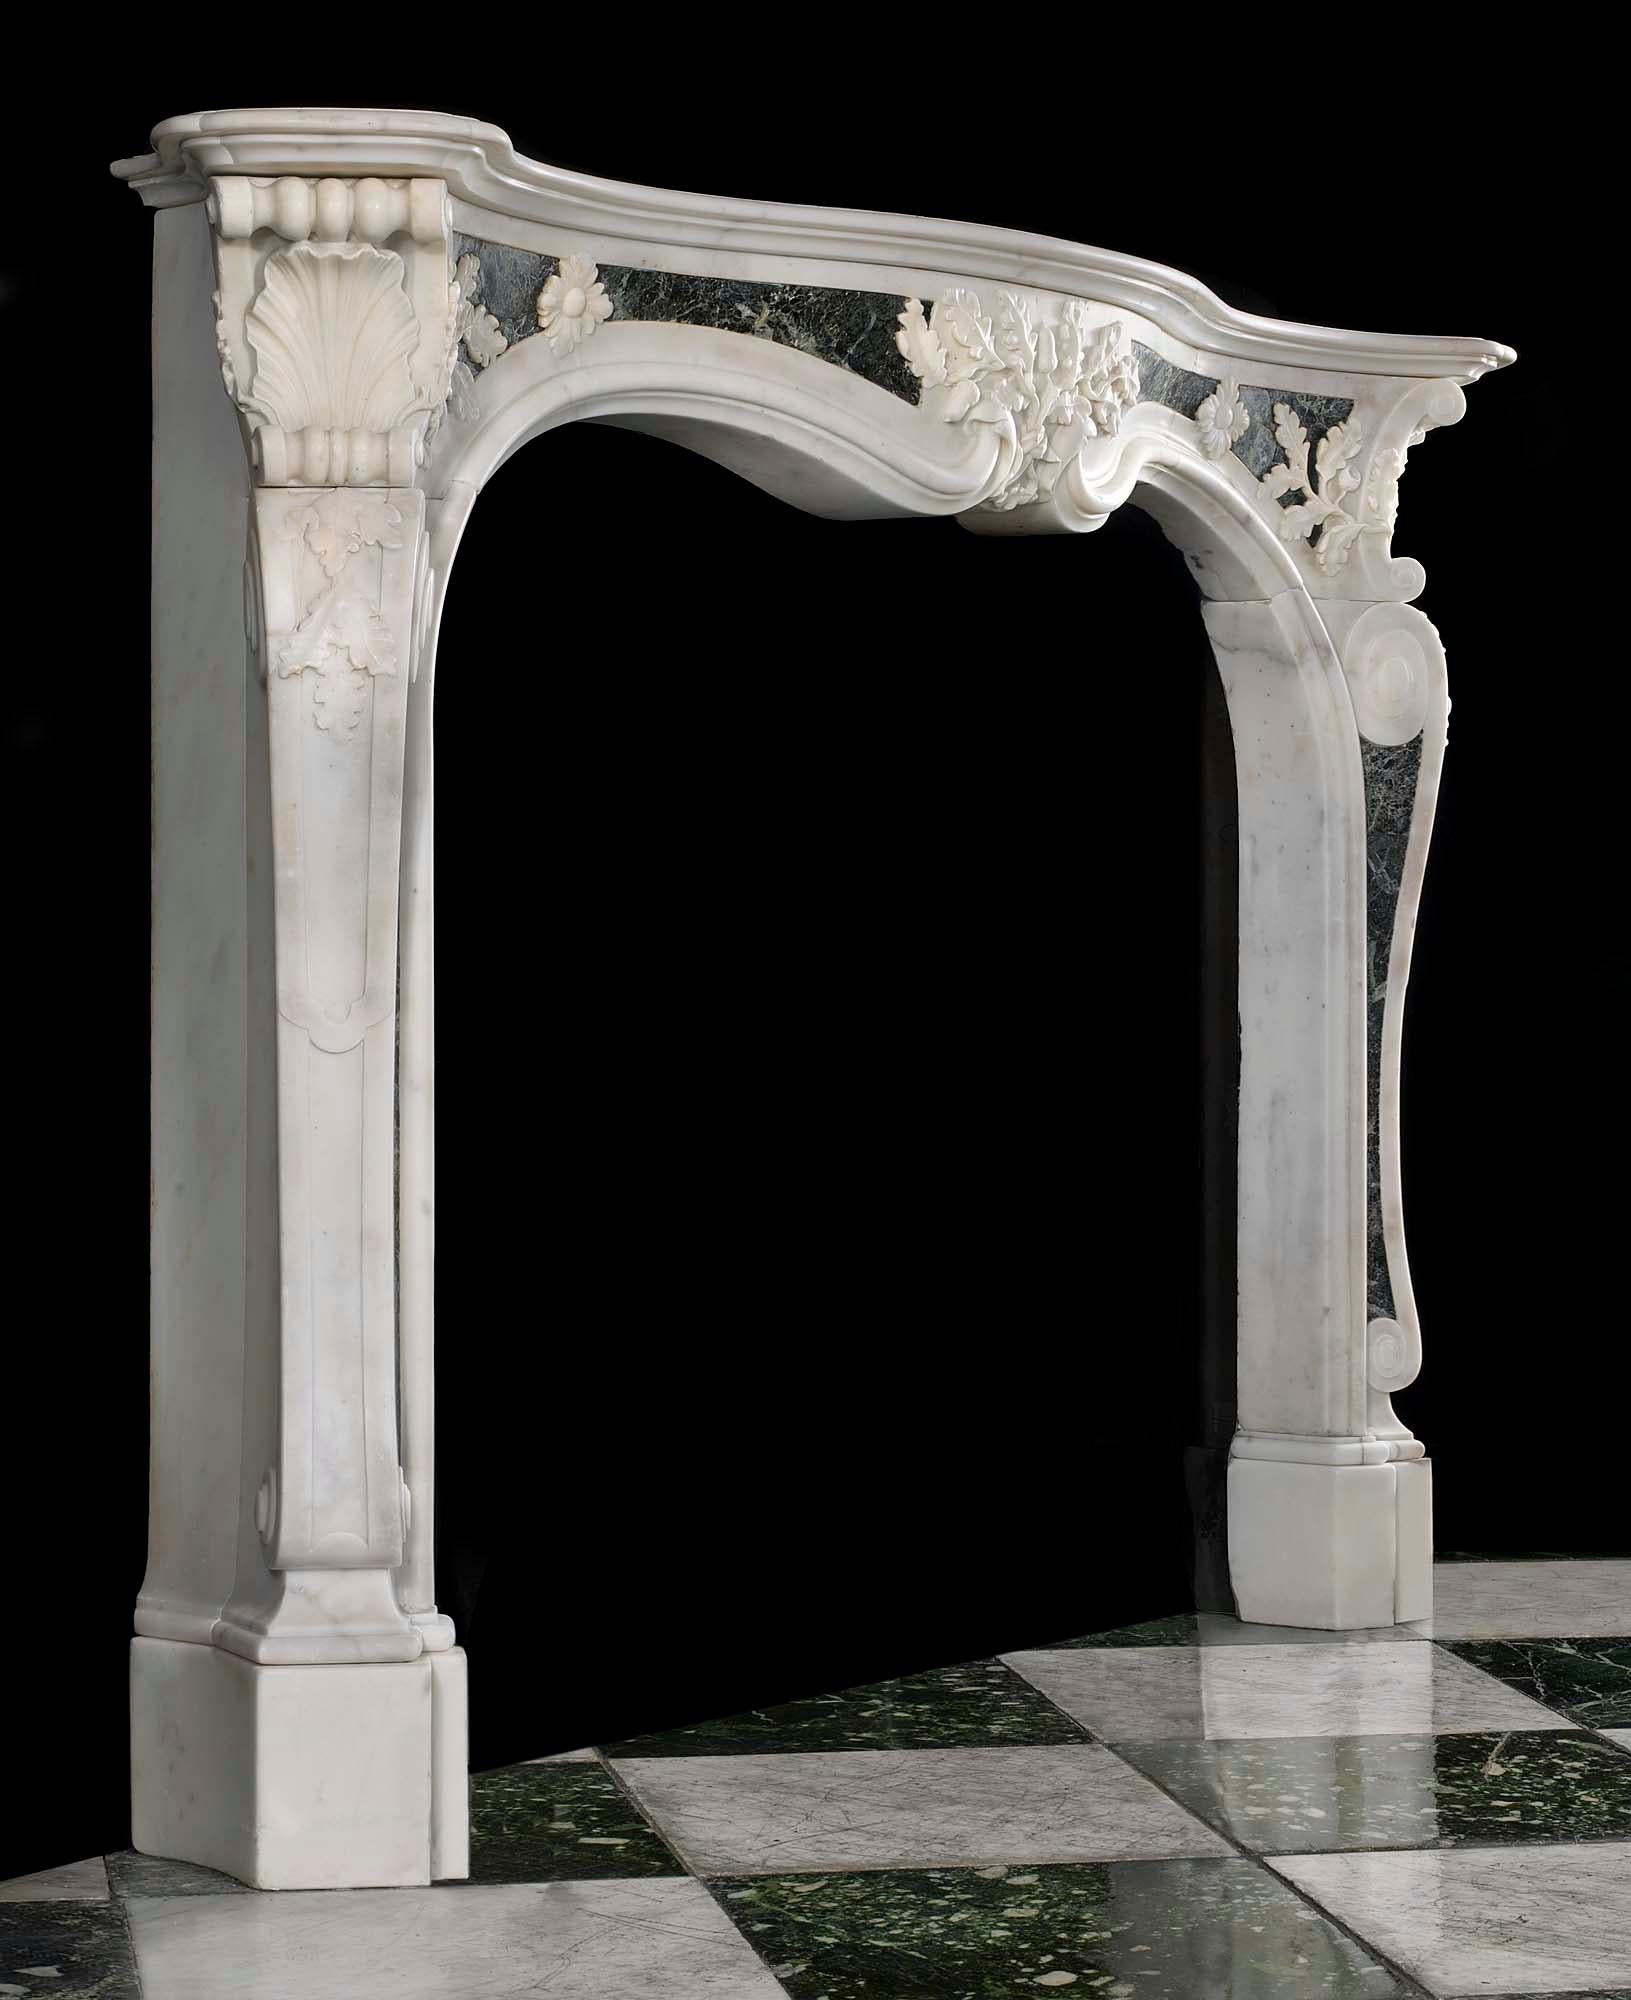 An important, rare mid-18th century Georgian English Rococo antique fireplace surround in Statuary and Maurin green marble influenced by the designs of Sir Henry Cheere (1703-1781) and Isaac Ware (1704-1766). The serpentine shelf rests above a